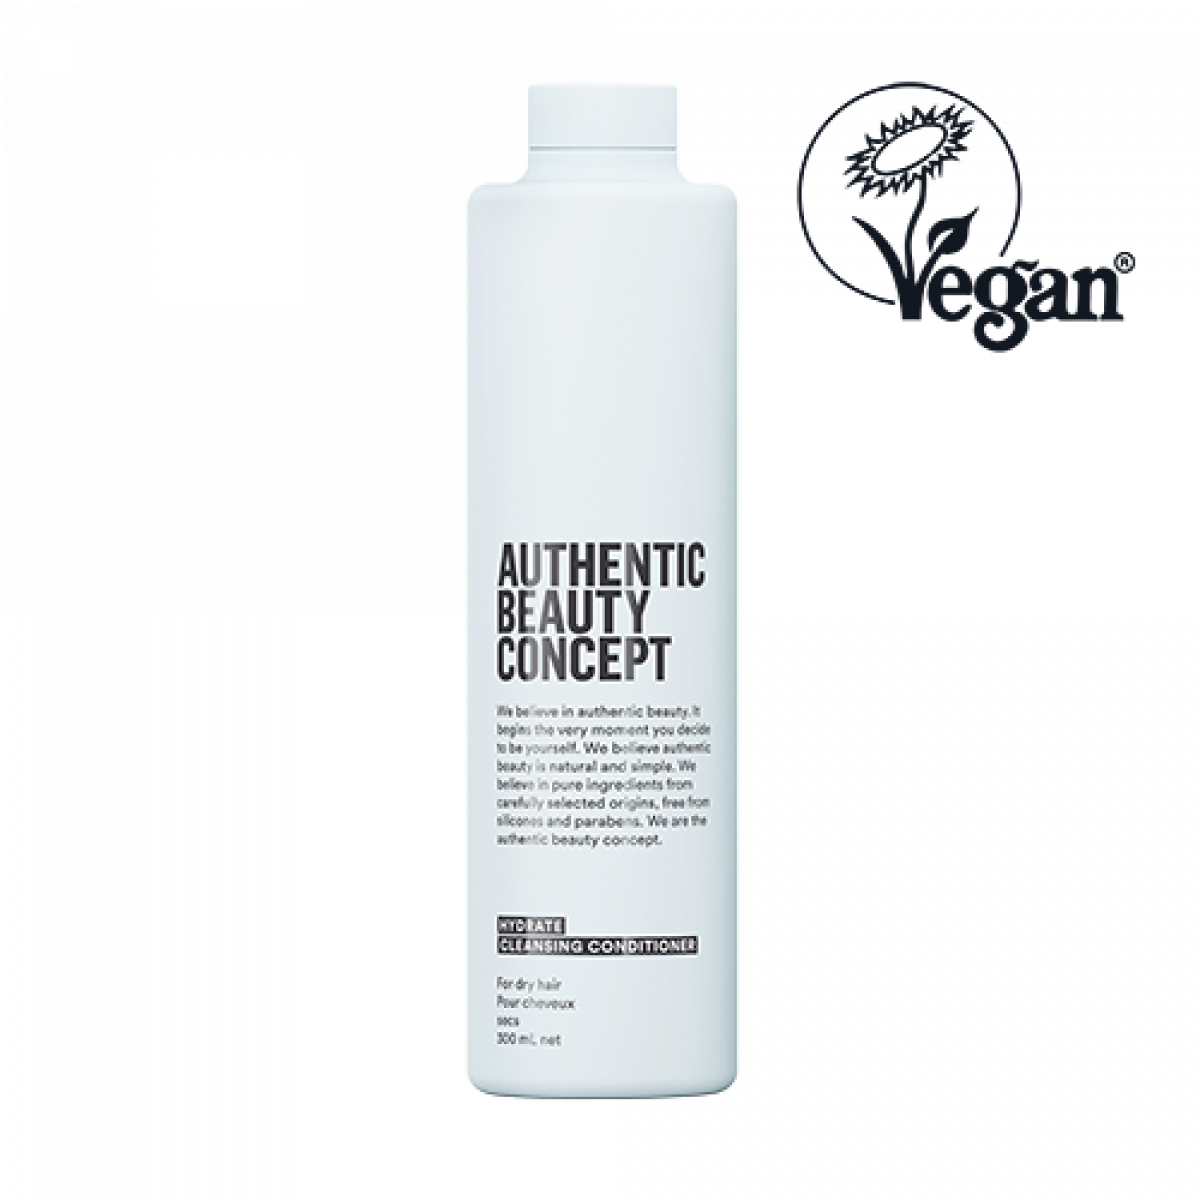 Authentic Beauty Concept – Hydrate Cleansing Conditioner 300ml